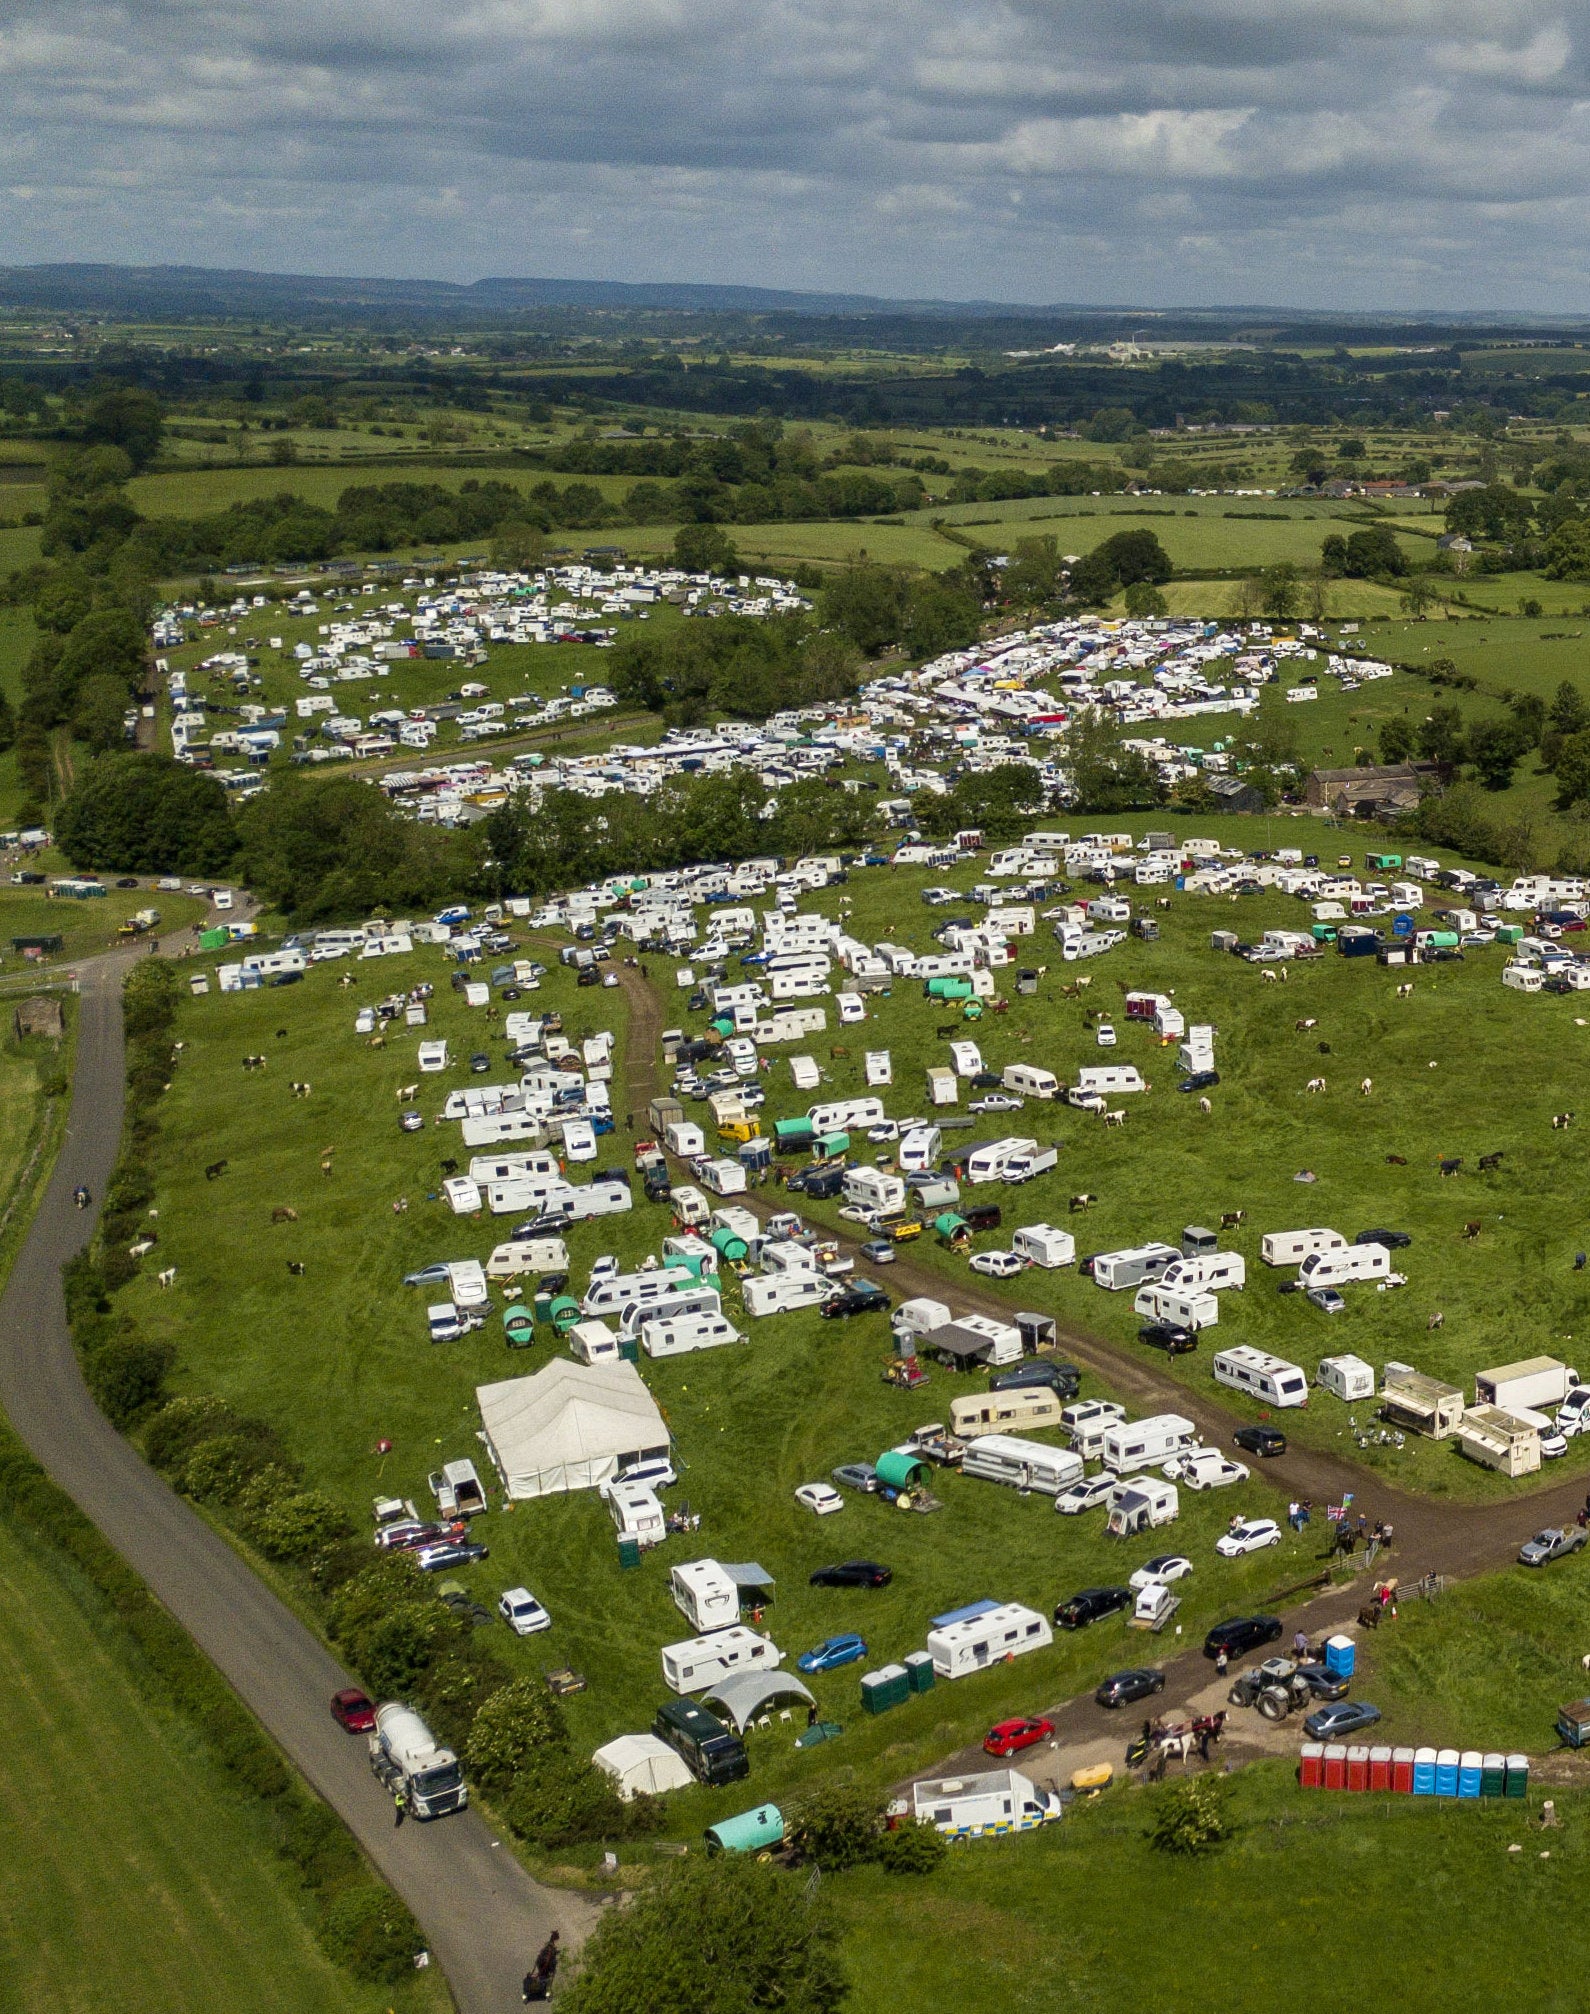 Aerial view of the travellers campsite on the outskirts of Appleby-in-Westmorland, Cumbria.